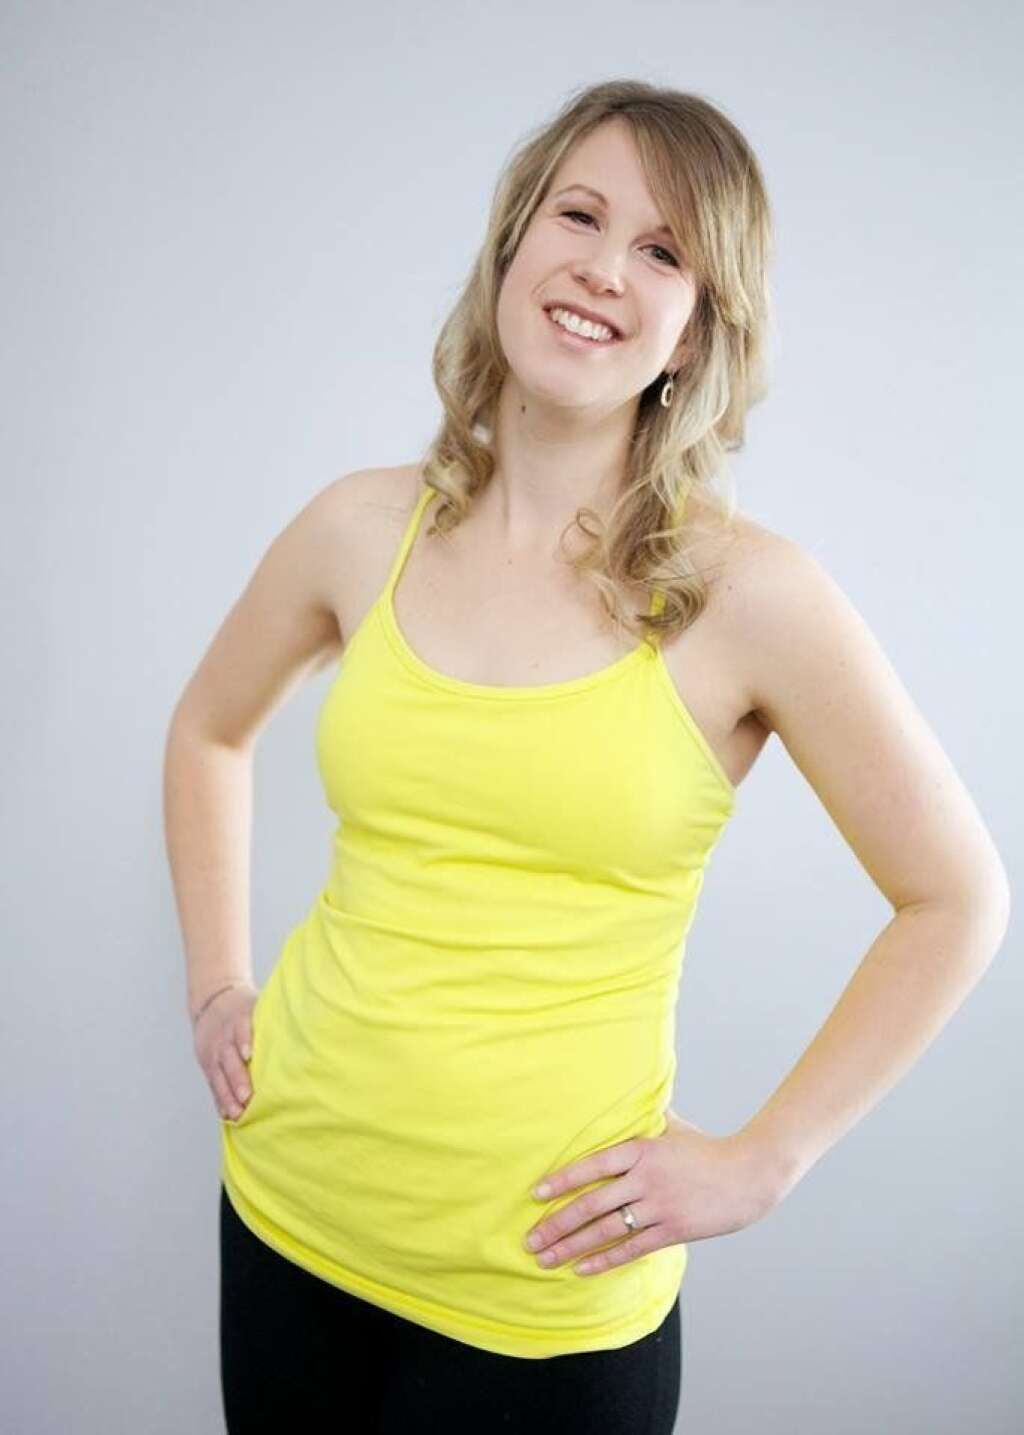 Becky AFTER - <a href="http://www.huffingtonpost.ca/2014/06/05/weight-lost_n_5438712.html" target="_blank">Read the story here</a>.